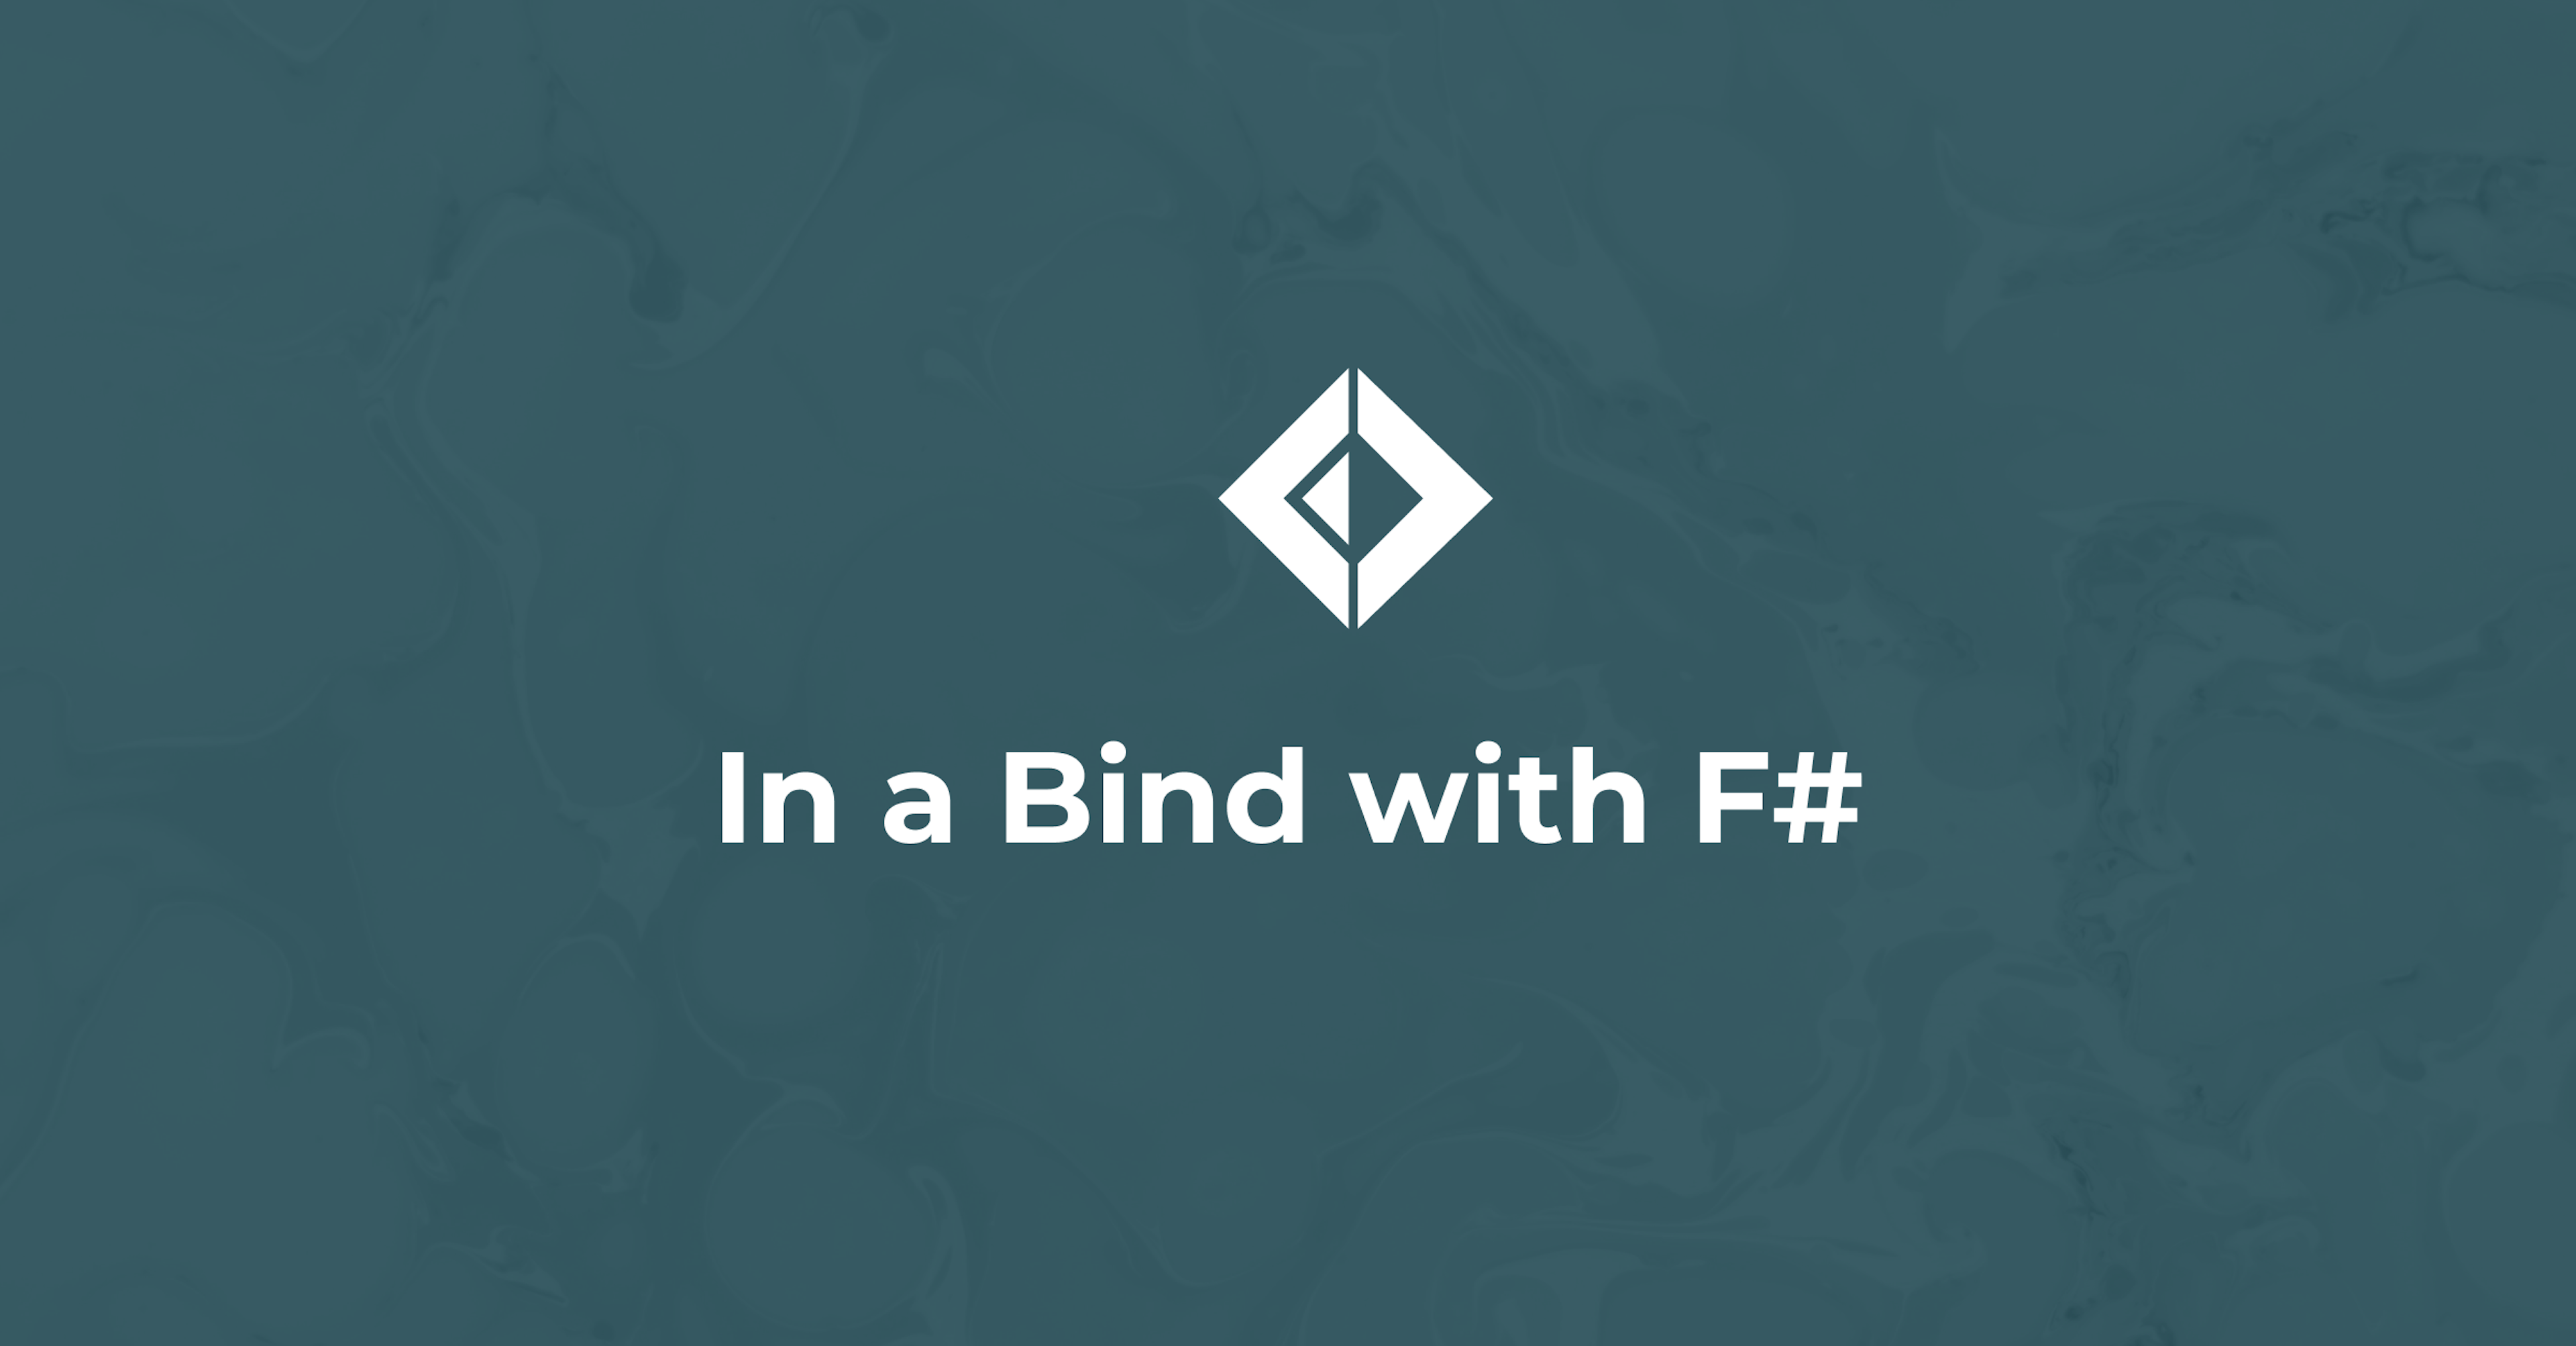 In a Bind with F#